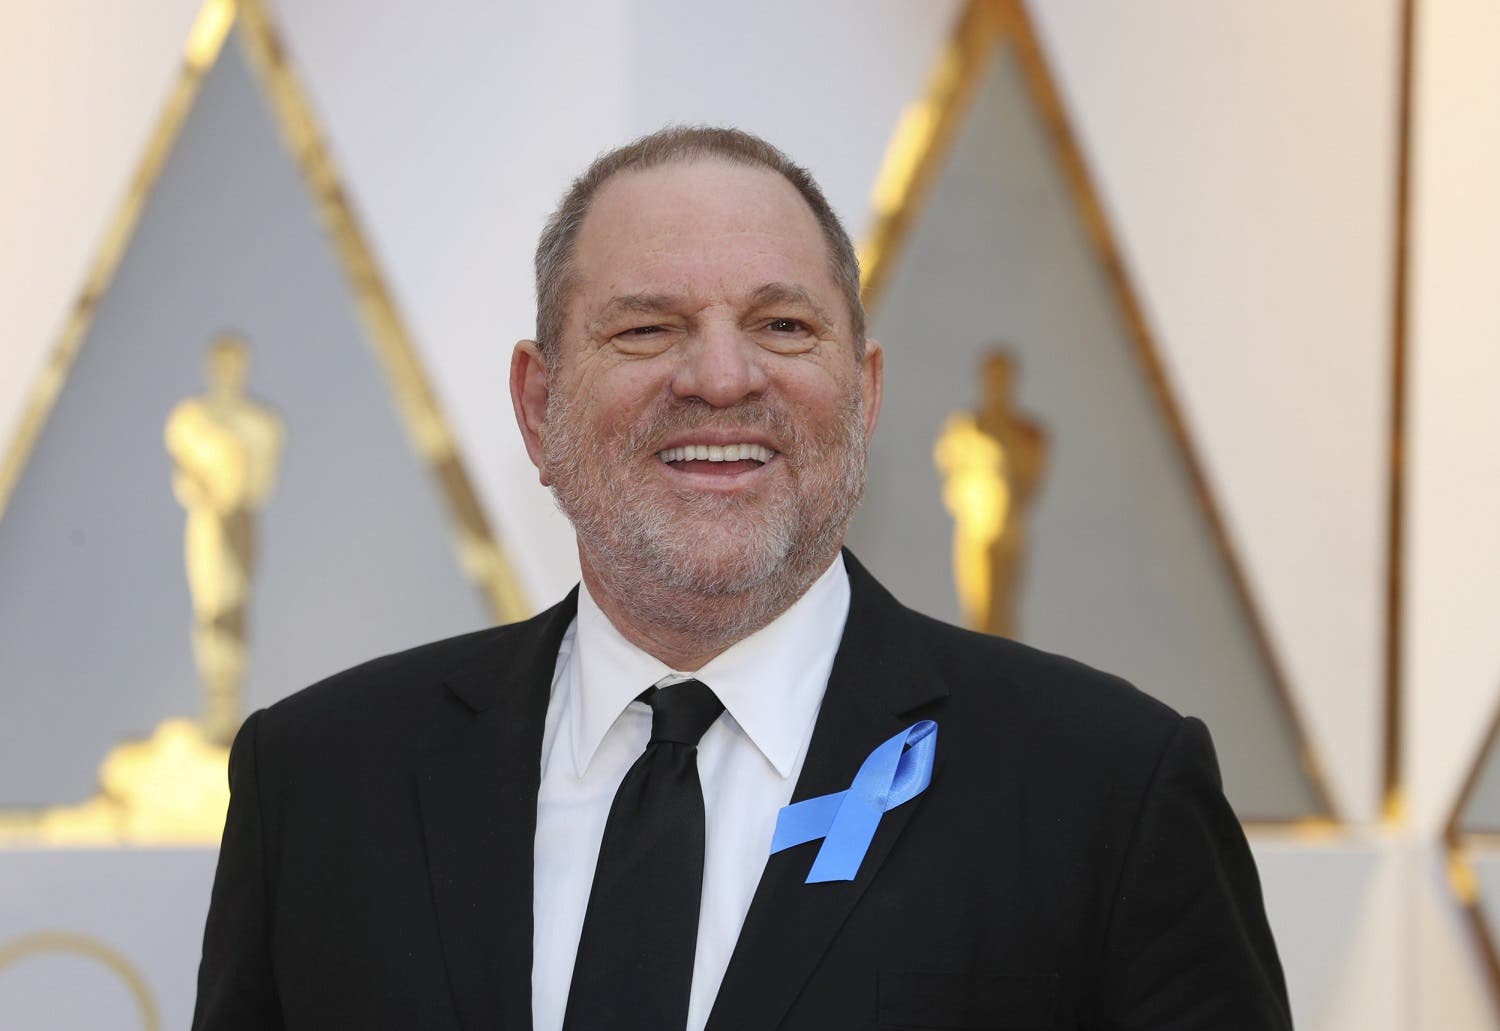  Harvey Weinstein poses on the Red Carpet after arriving at the 89th Academy Awards in Hollywood, California, U.S., February 26, 2017. REUTERS